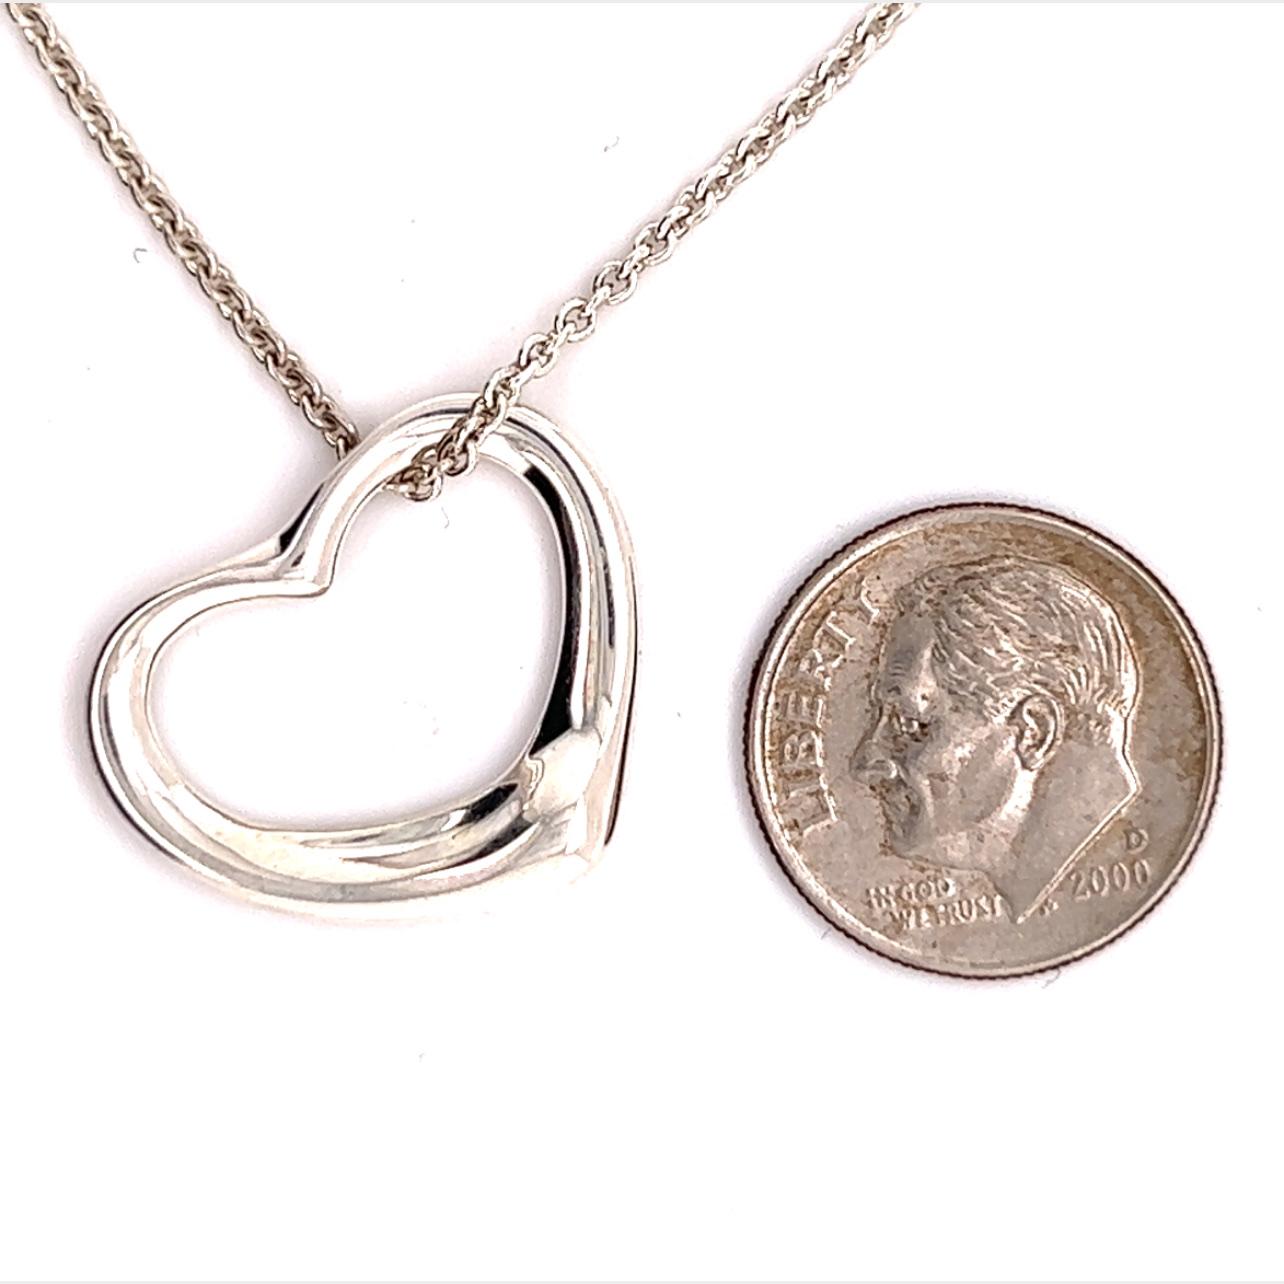 Tiffany & Co Estate Large Heart Pendtiffaant Silver Necklace by Elsa Peretti 5